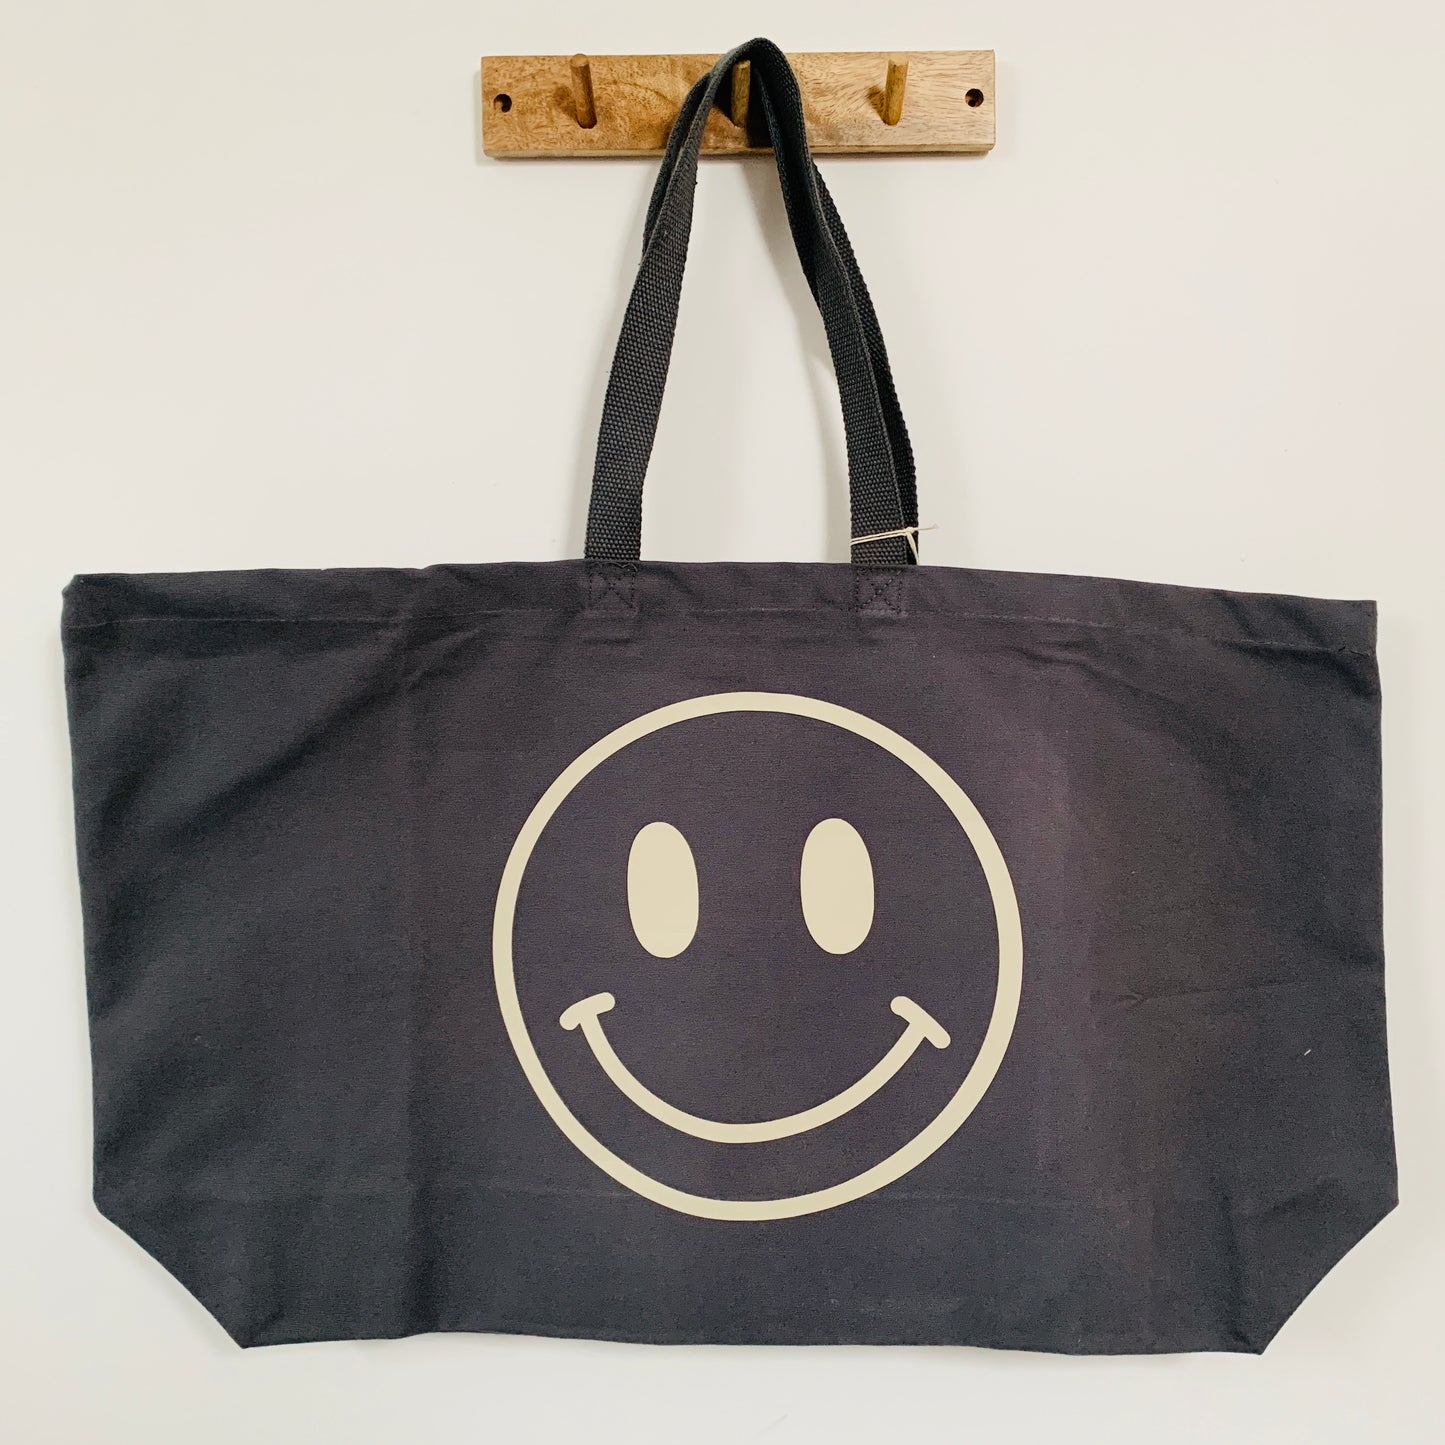 Smiley Face Oversized Tote Bag - Charcoal